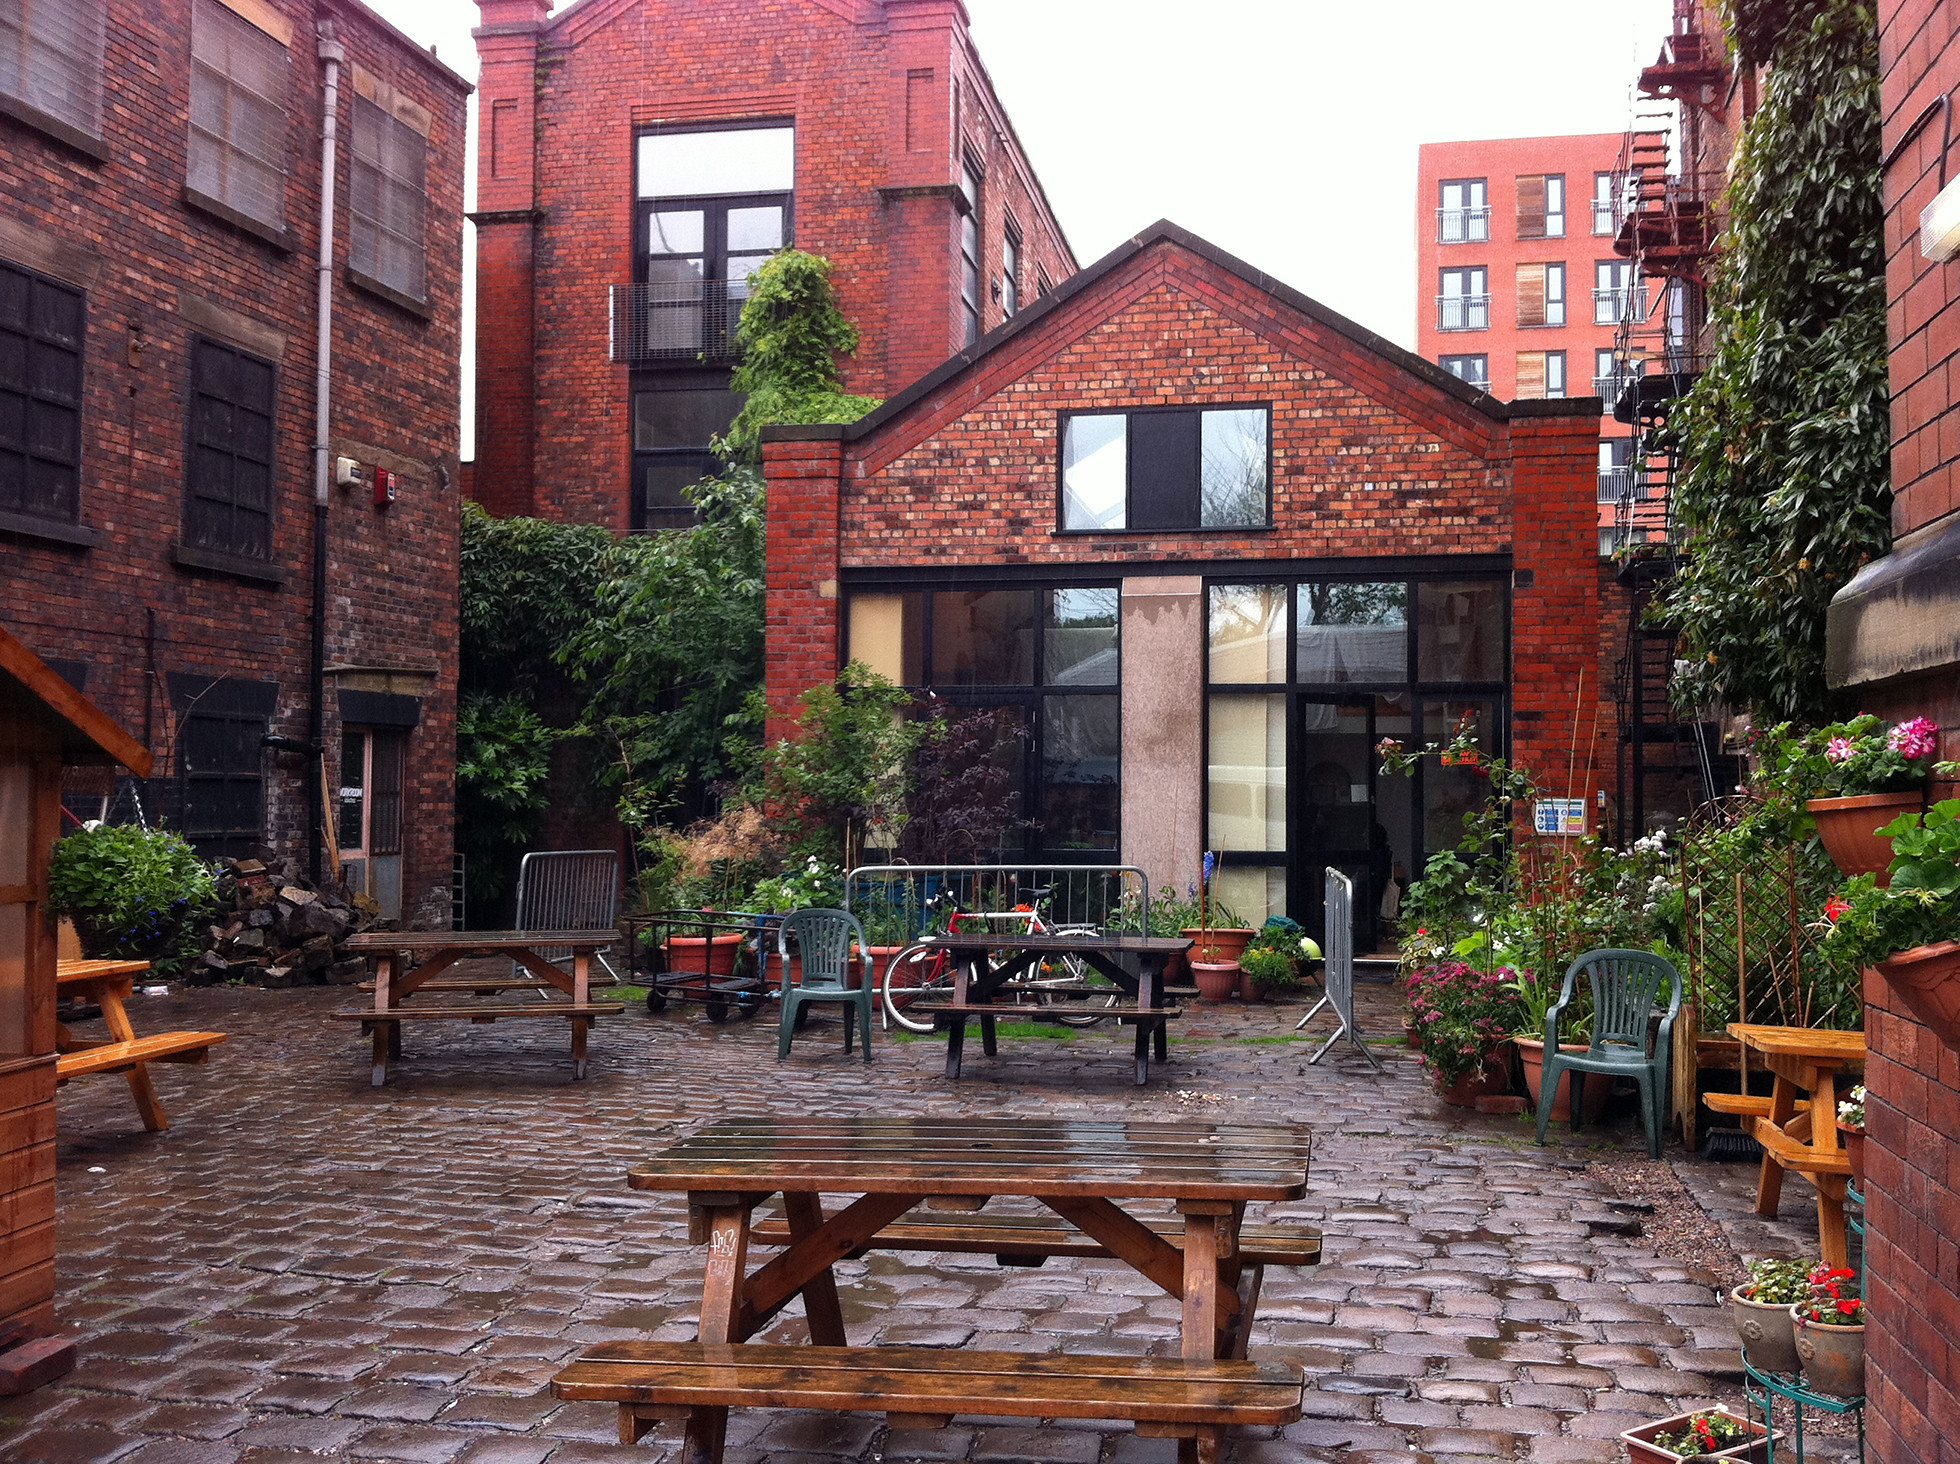 Islington Mill building and courtyard.